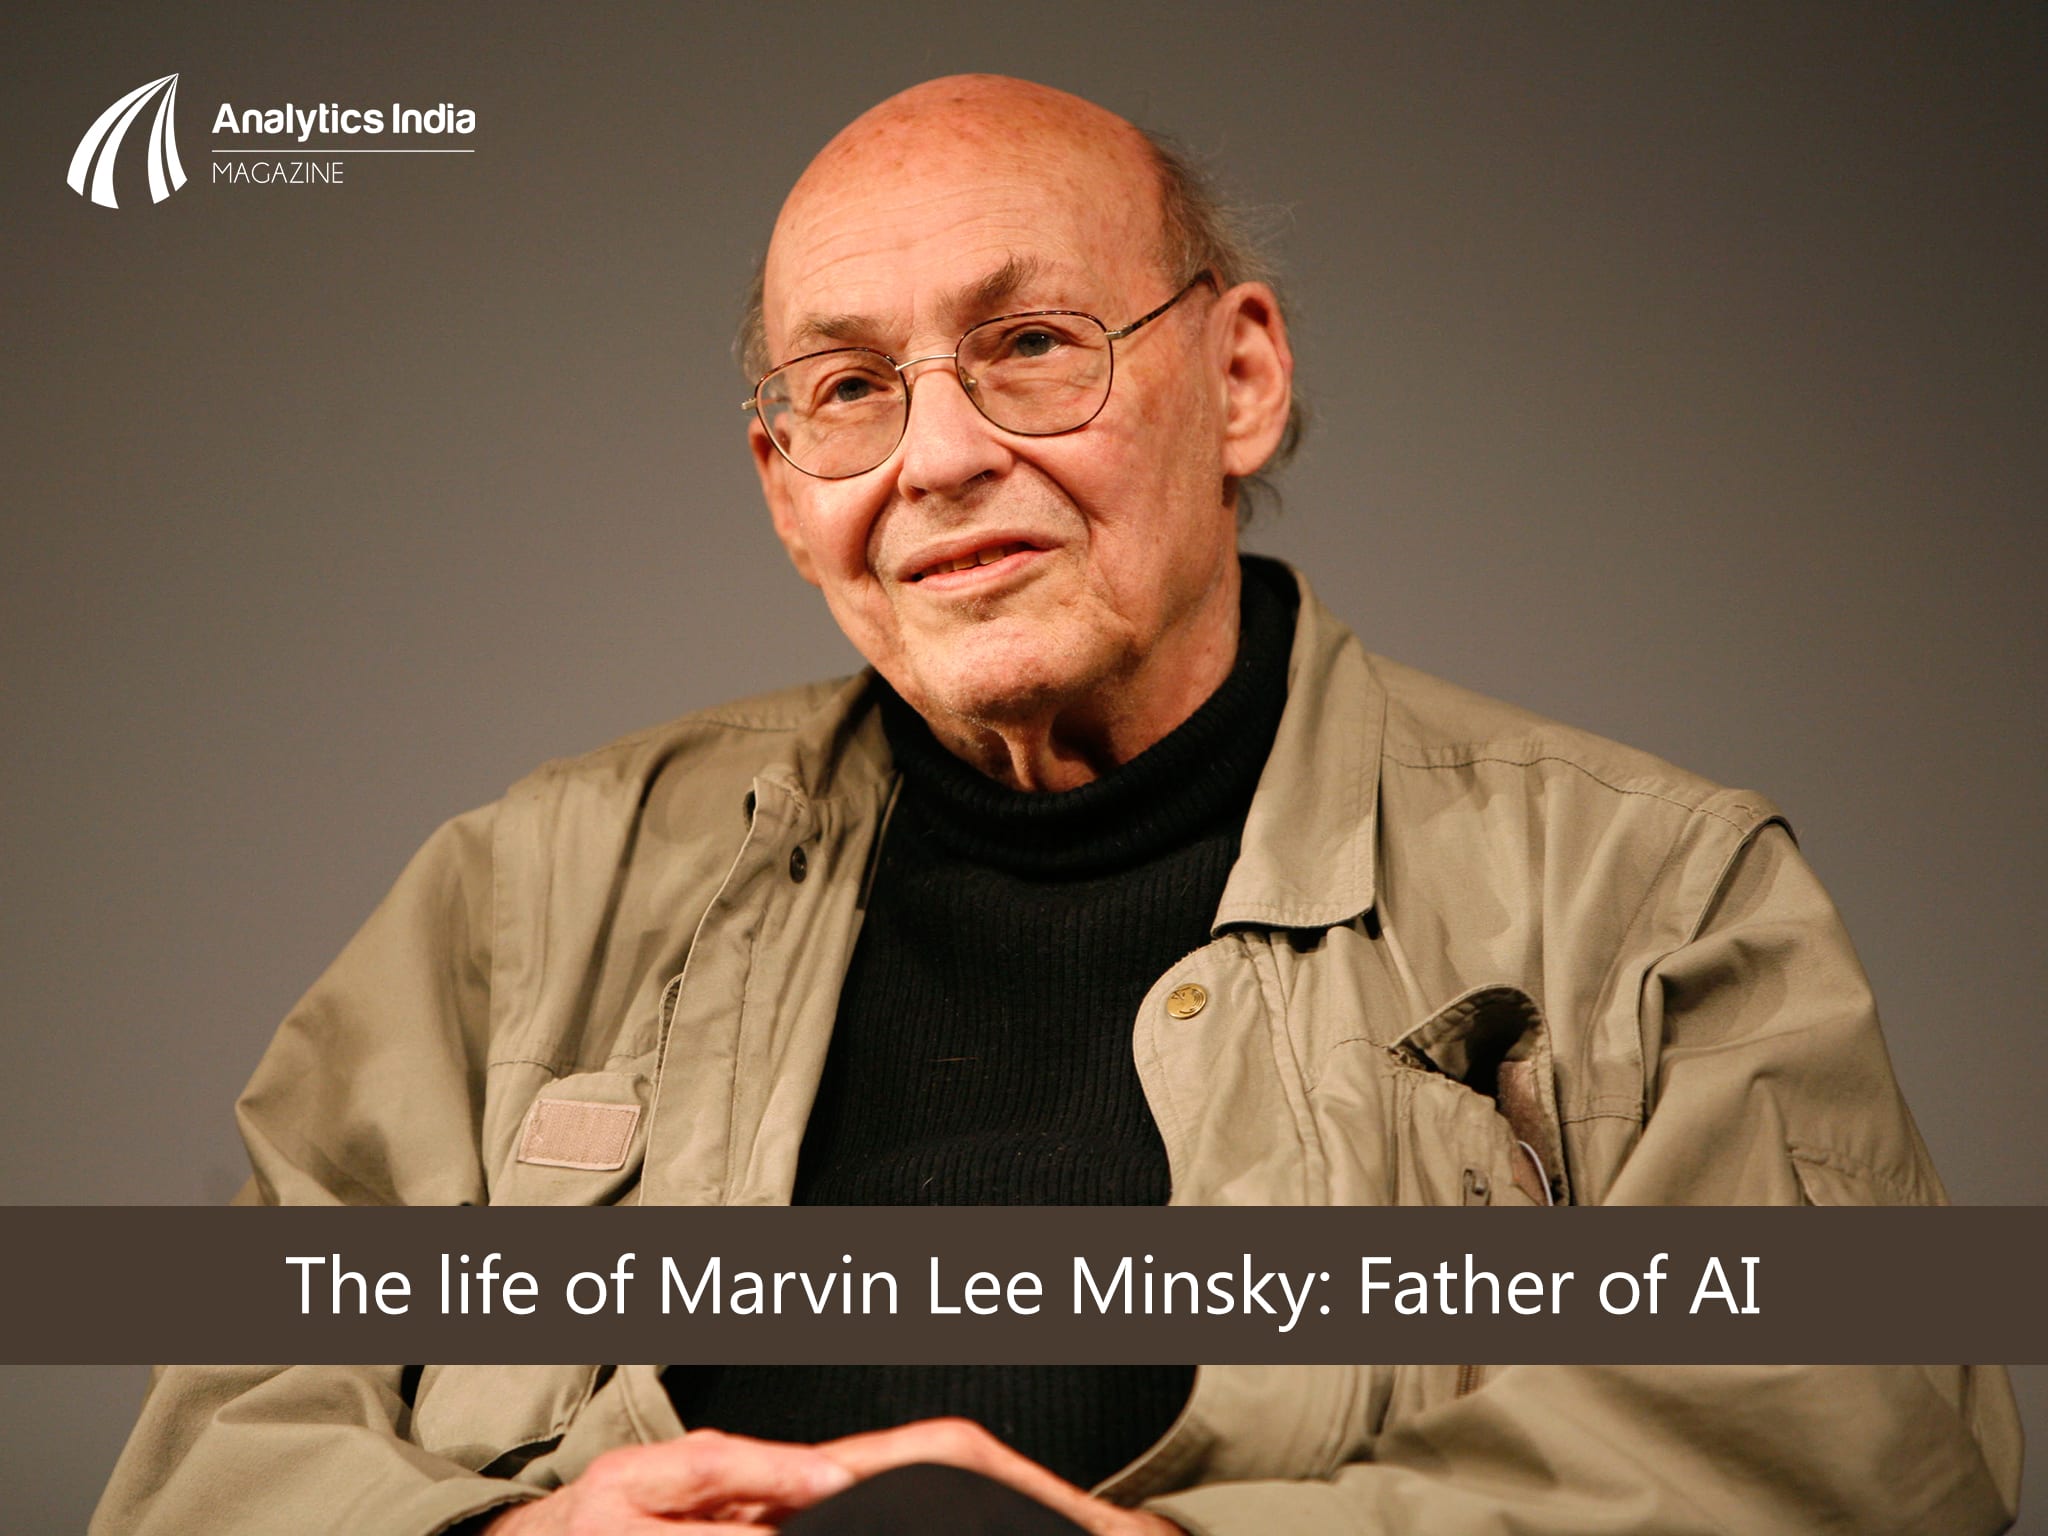 The life of Marvin Lee Minsky: Father of AI